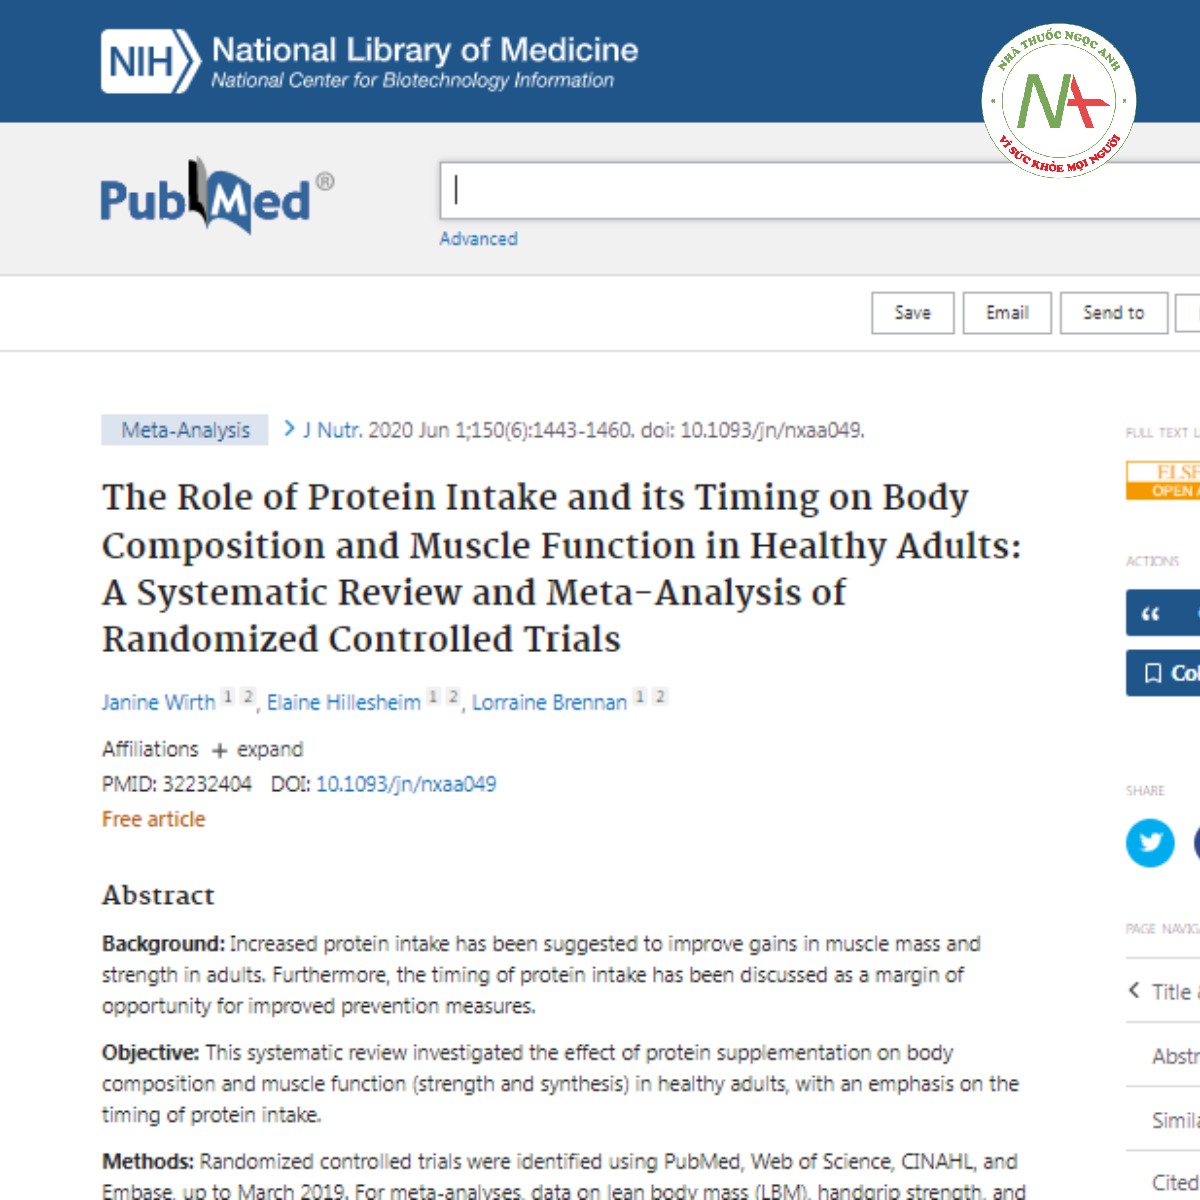 The Role of Protein Intake and its Timing on Body Composition and Muscle Function in Healthy Adults_ A Systematic Review and Meta-Analysis of Randomized Controlled Trials